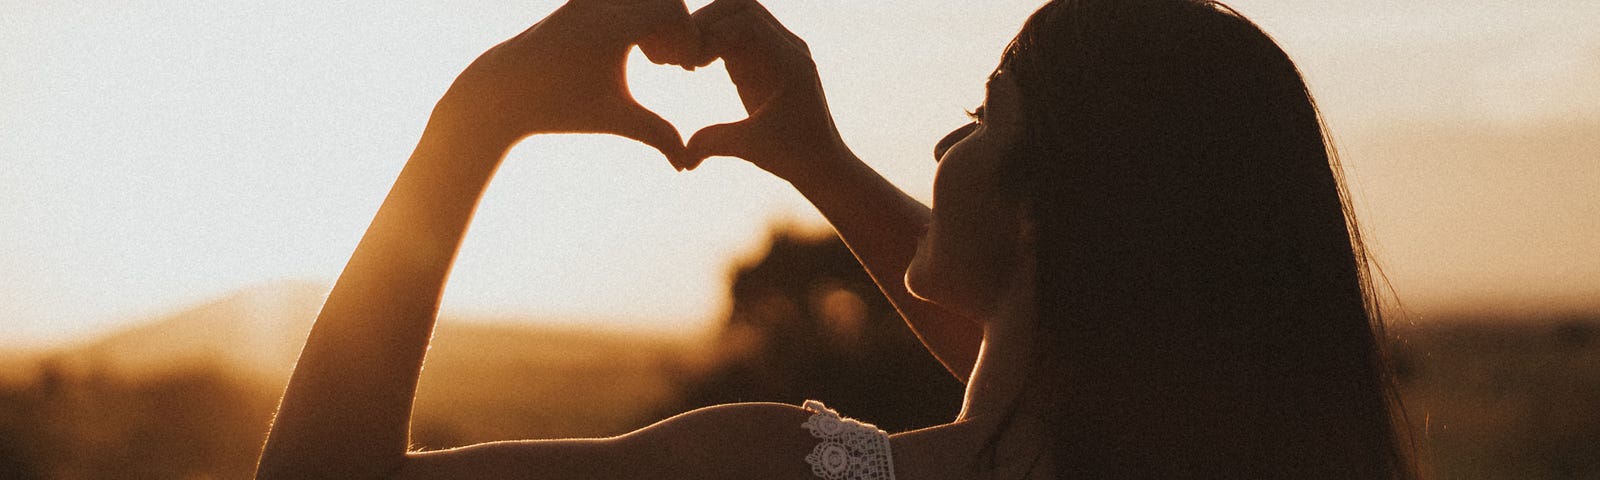 Woman making heart sign at sunset